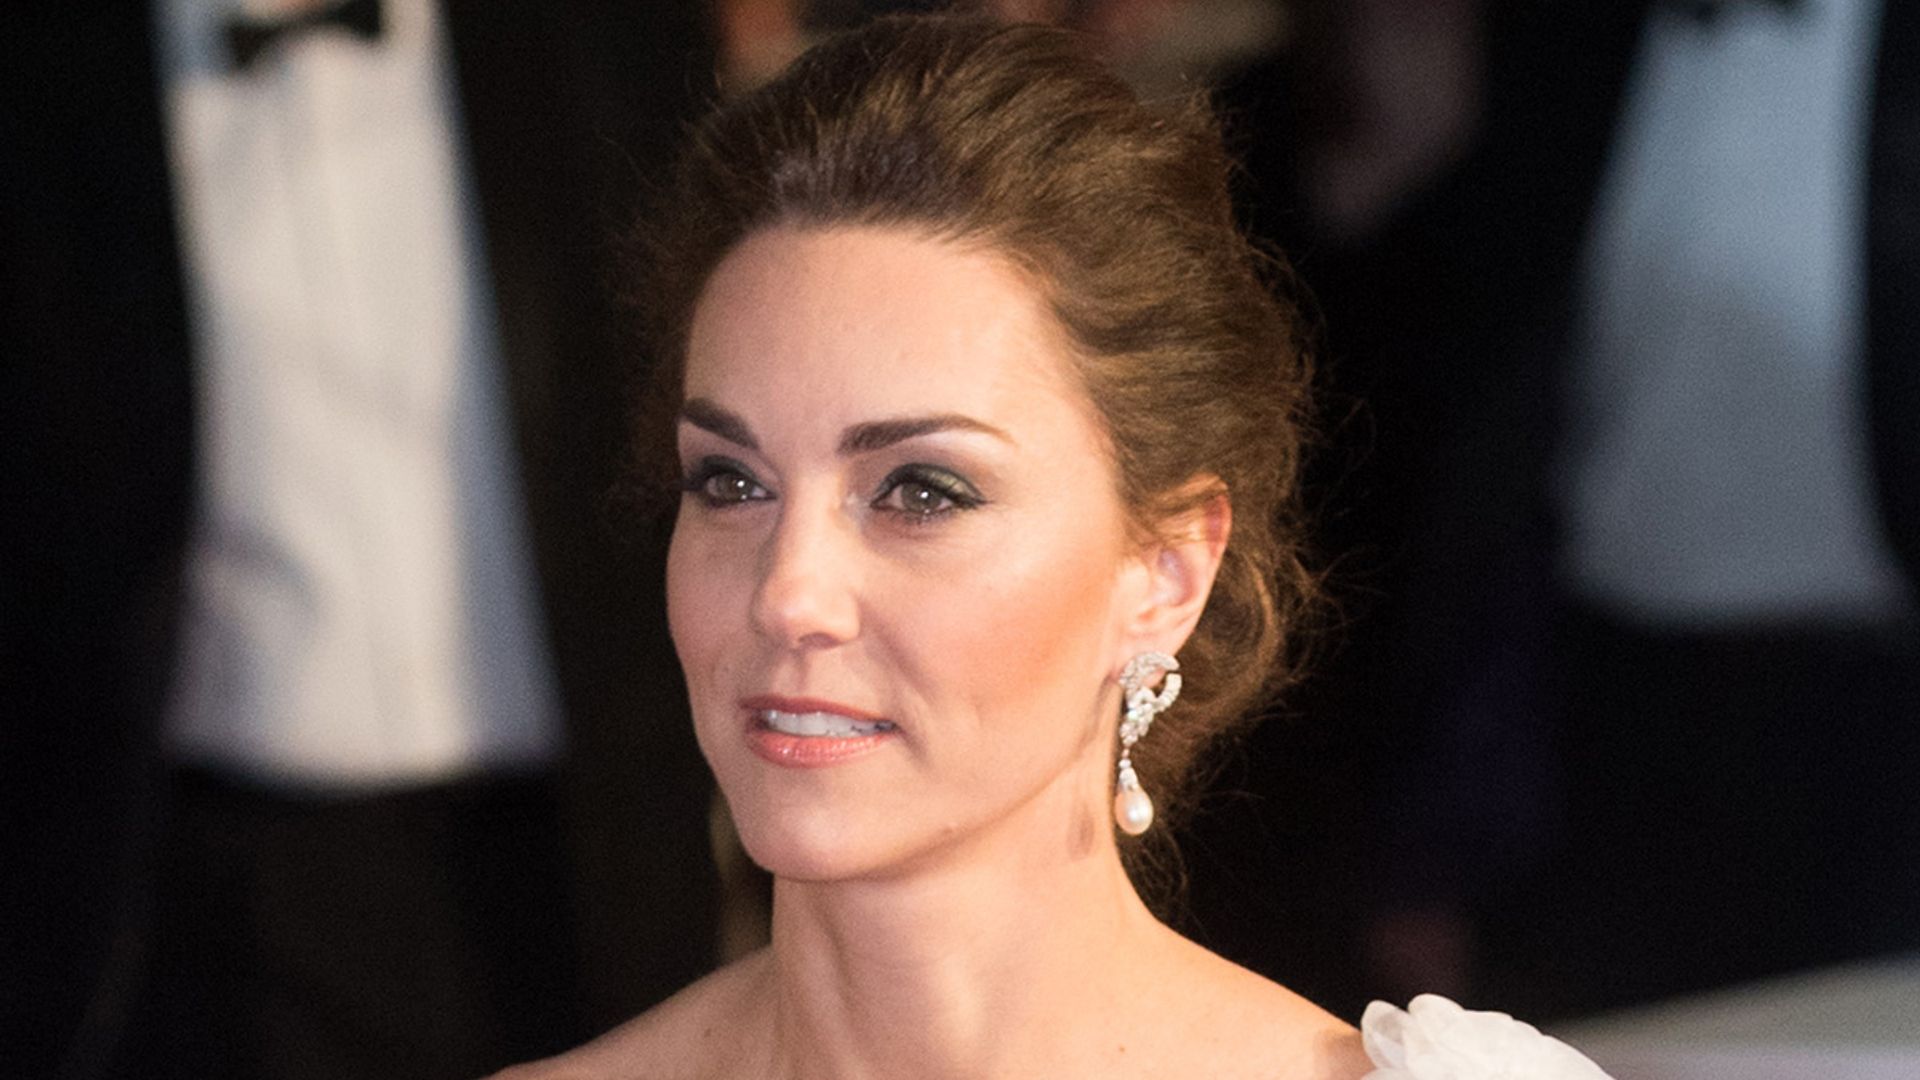 The one dress royal fans hope Kate Middleton will wear to the BAFTAs